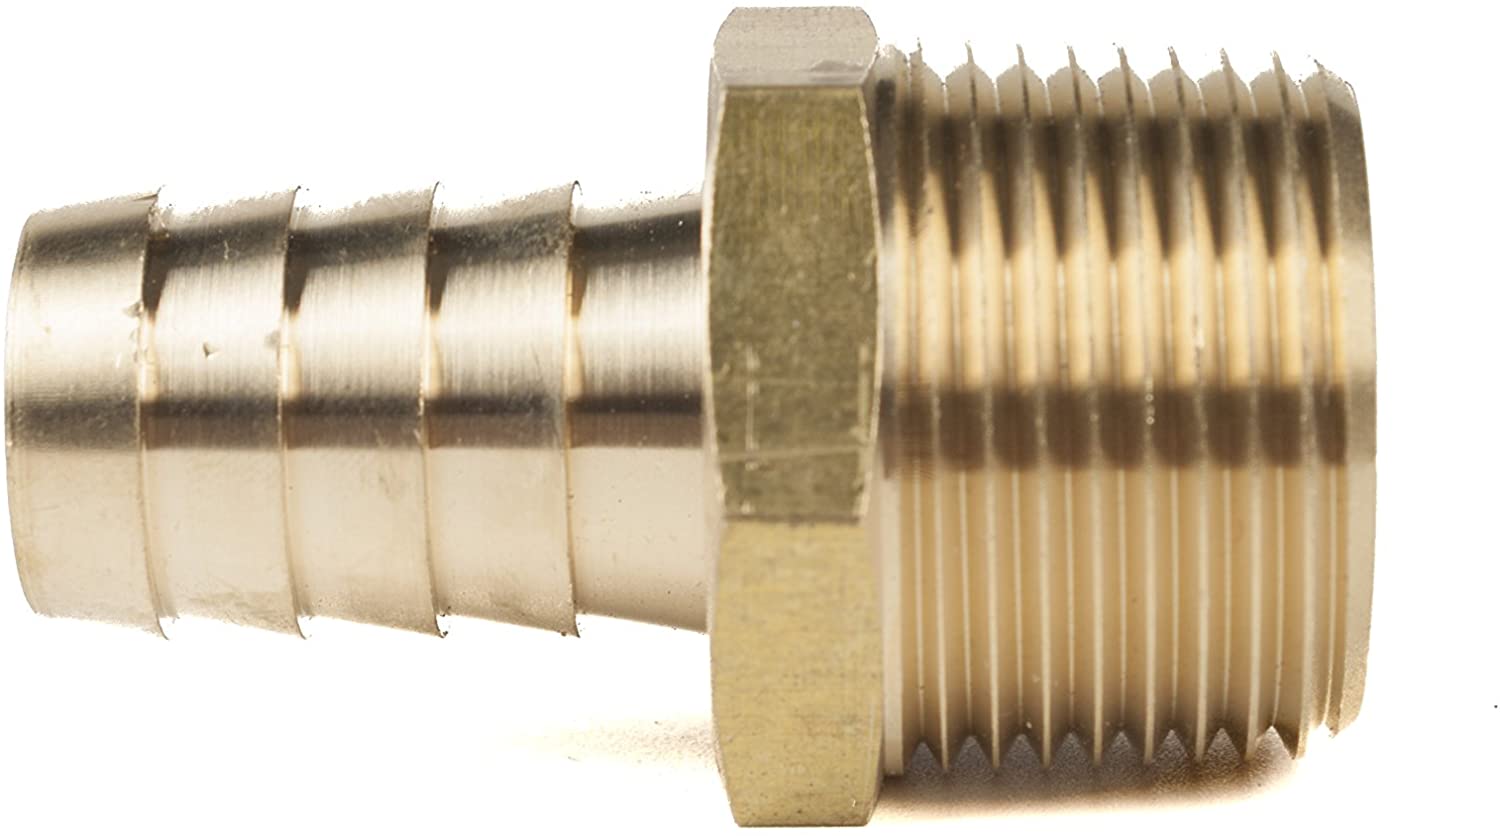 LTWFITTING Brass 5/8 Inch Barb x 3/4 Inch FHT Hose Repair/Connector,Garden Hose Fitting(Pack of 5)